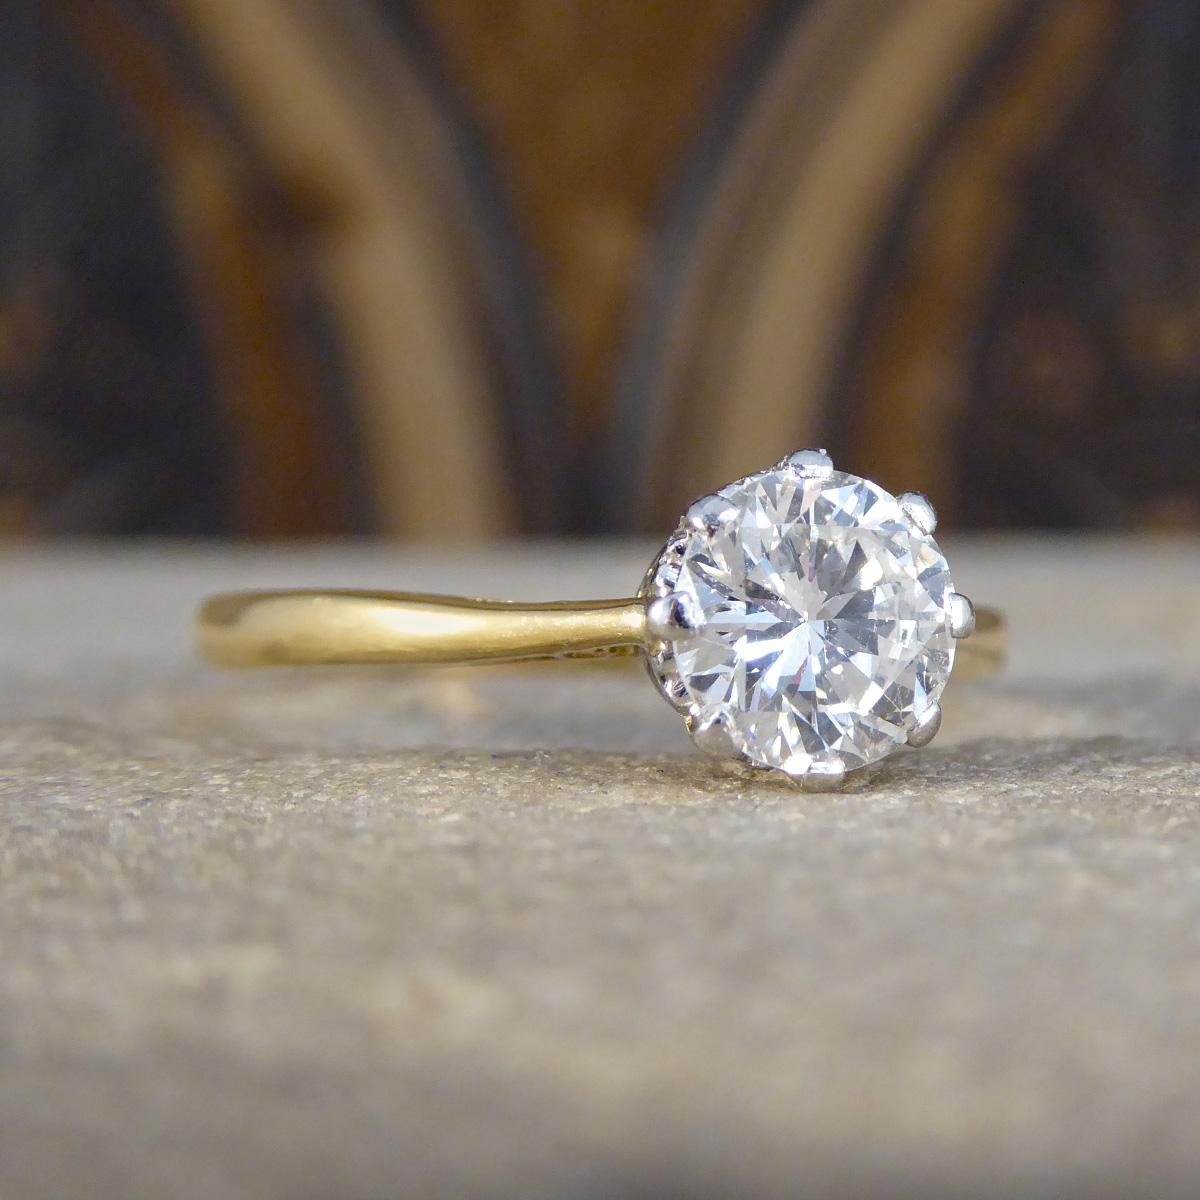 Step back in time with our 1920's 1.00ct Diamond solitaire engagement ring, a treasure that blends the elegance of yesteryears with timeless beauty. Expertly crafted in 18ct yellow gold and crowned with a platinum setting, this exquisite piece